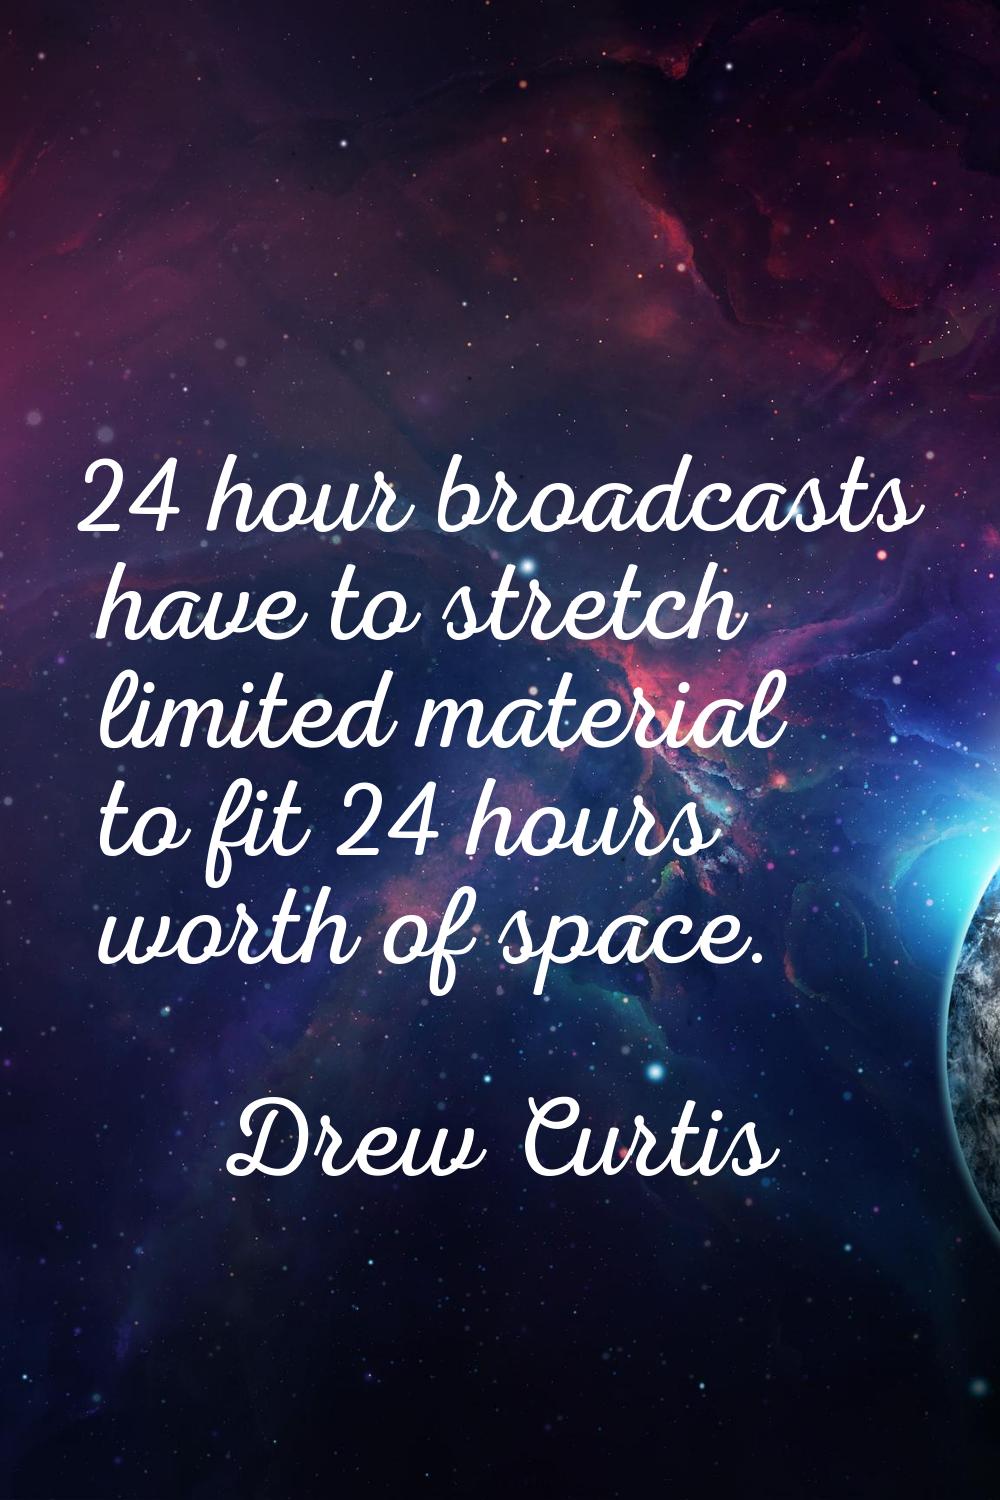 24 hour broadcasts have to stretch limited material to fit 24 hours worth of space.